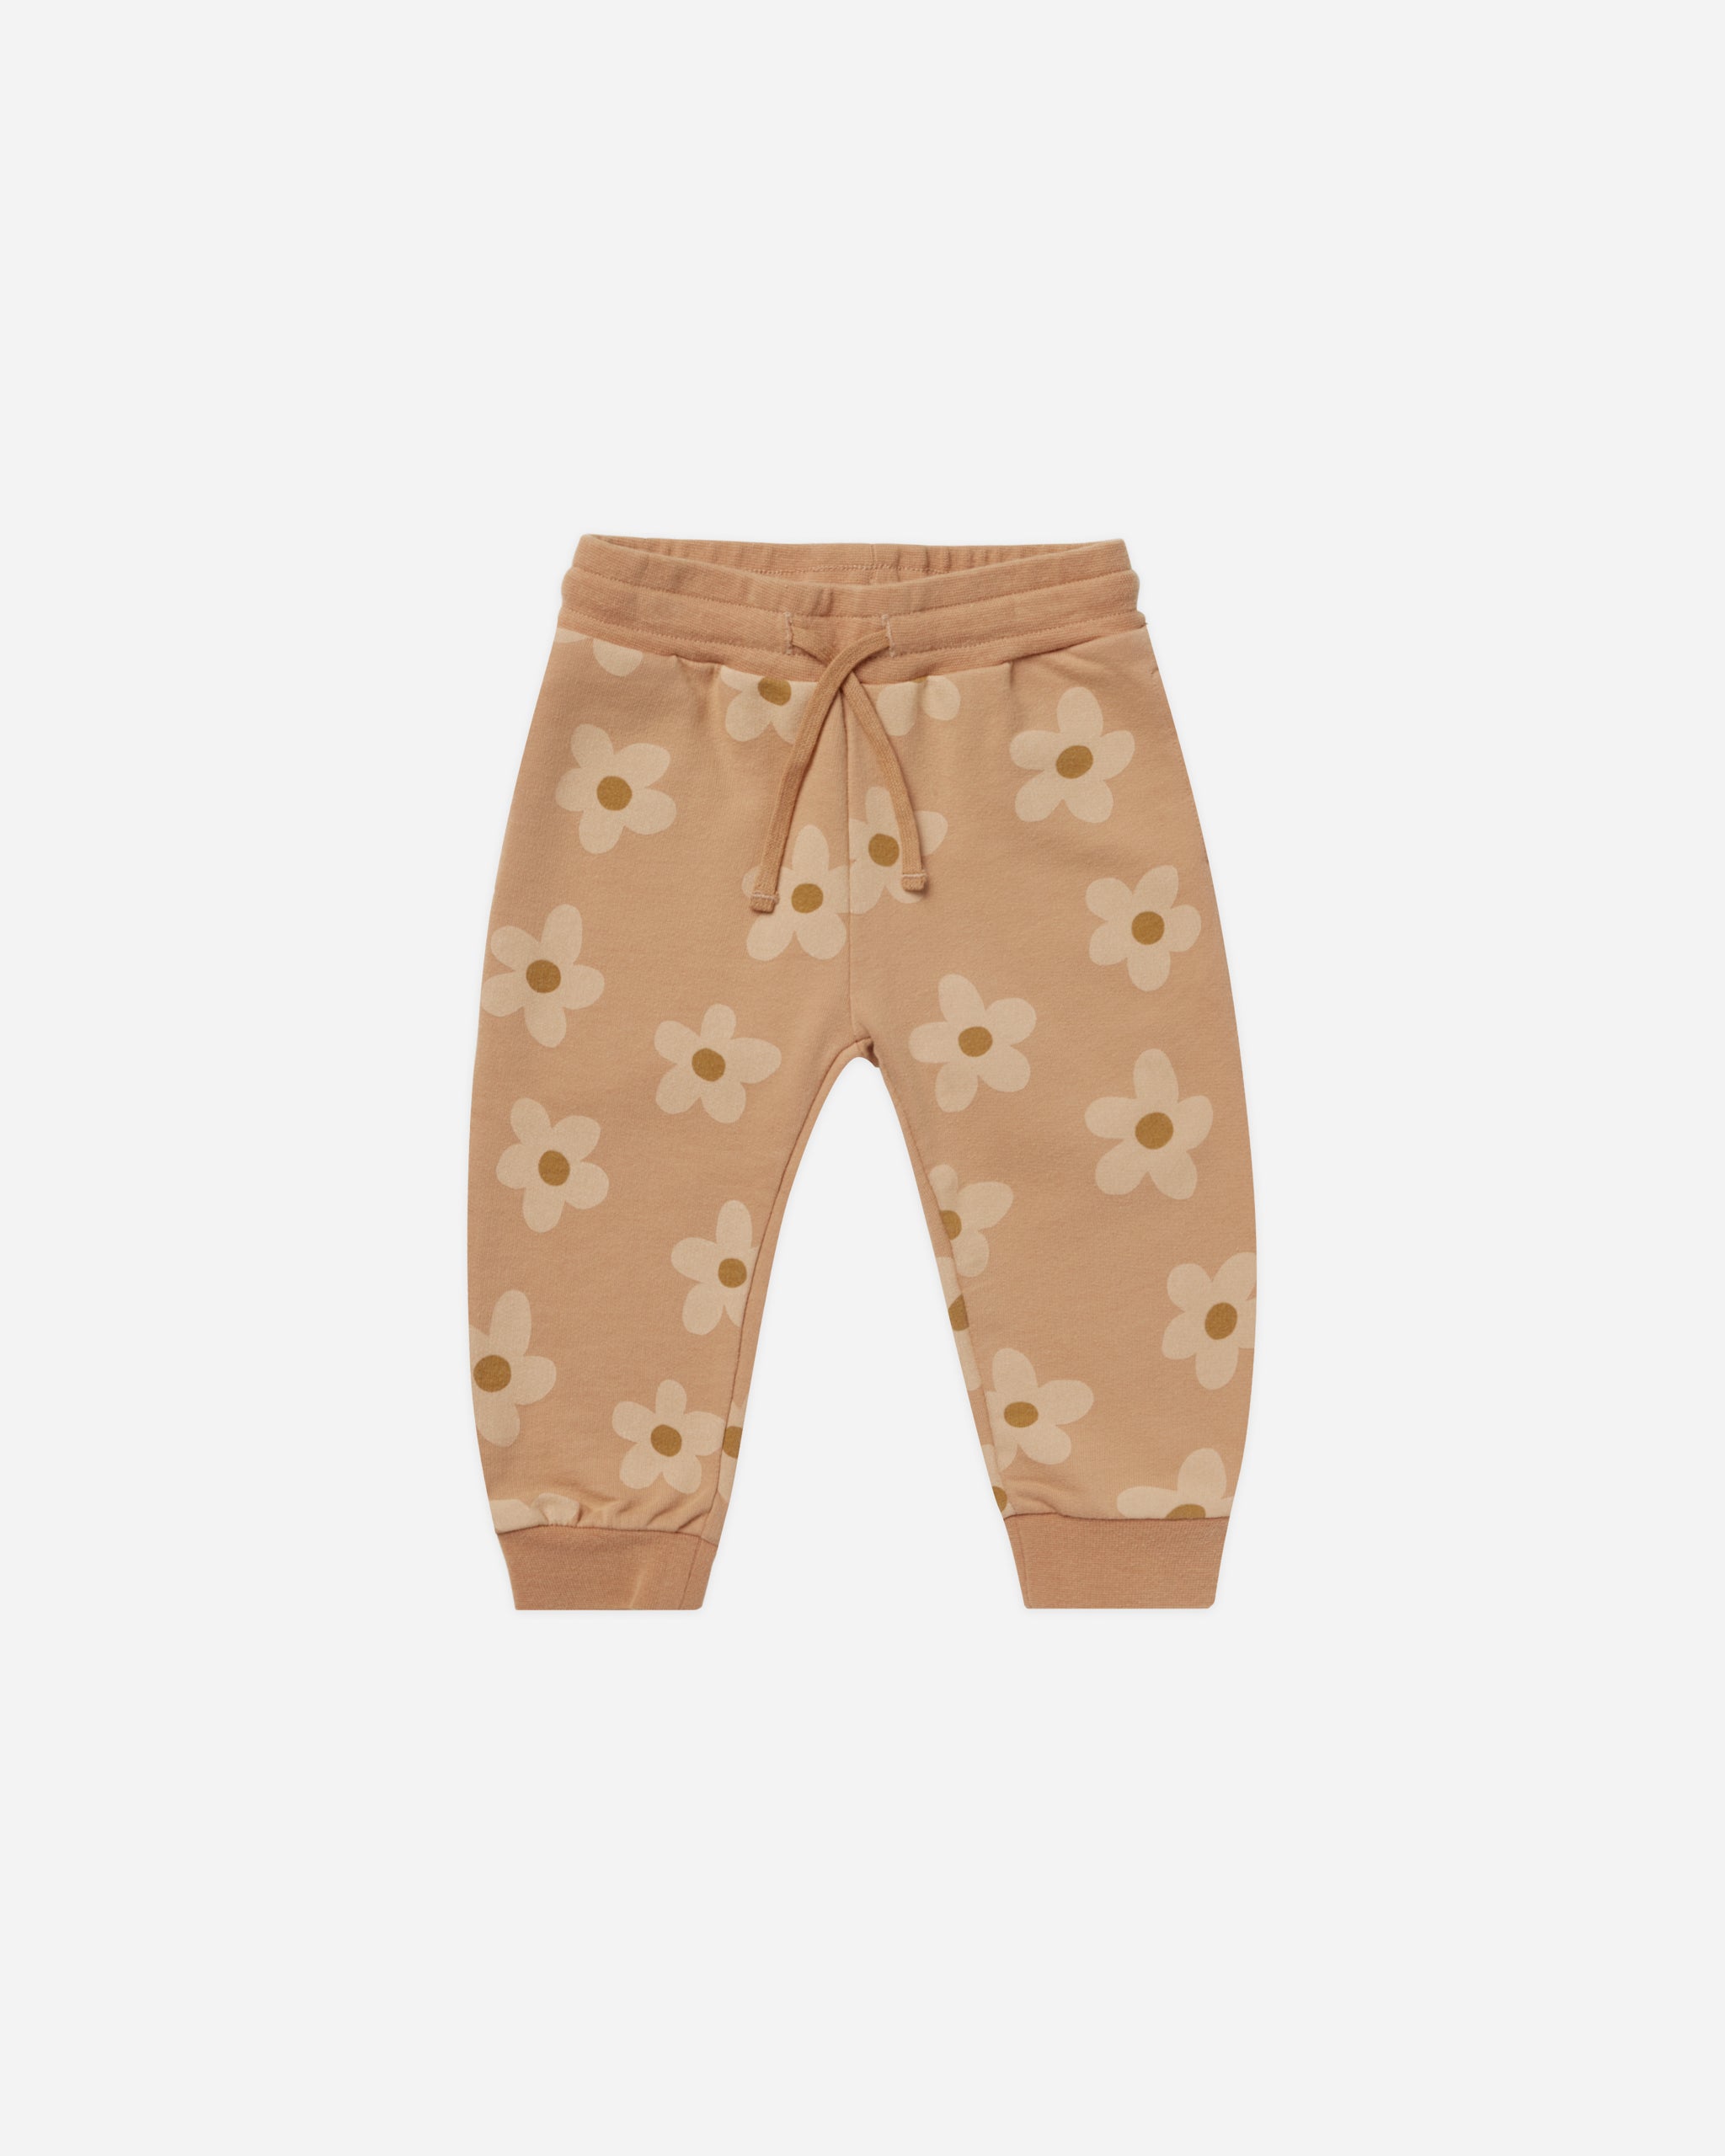 Jogger Pant || Melon Daisy - Rylee + Cru | Kids Clothes | Trendy Baby Clothes | Modern Infant Outfits |